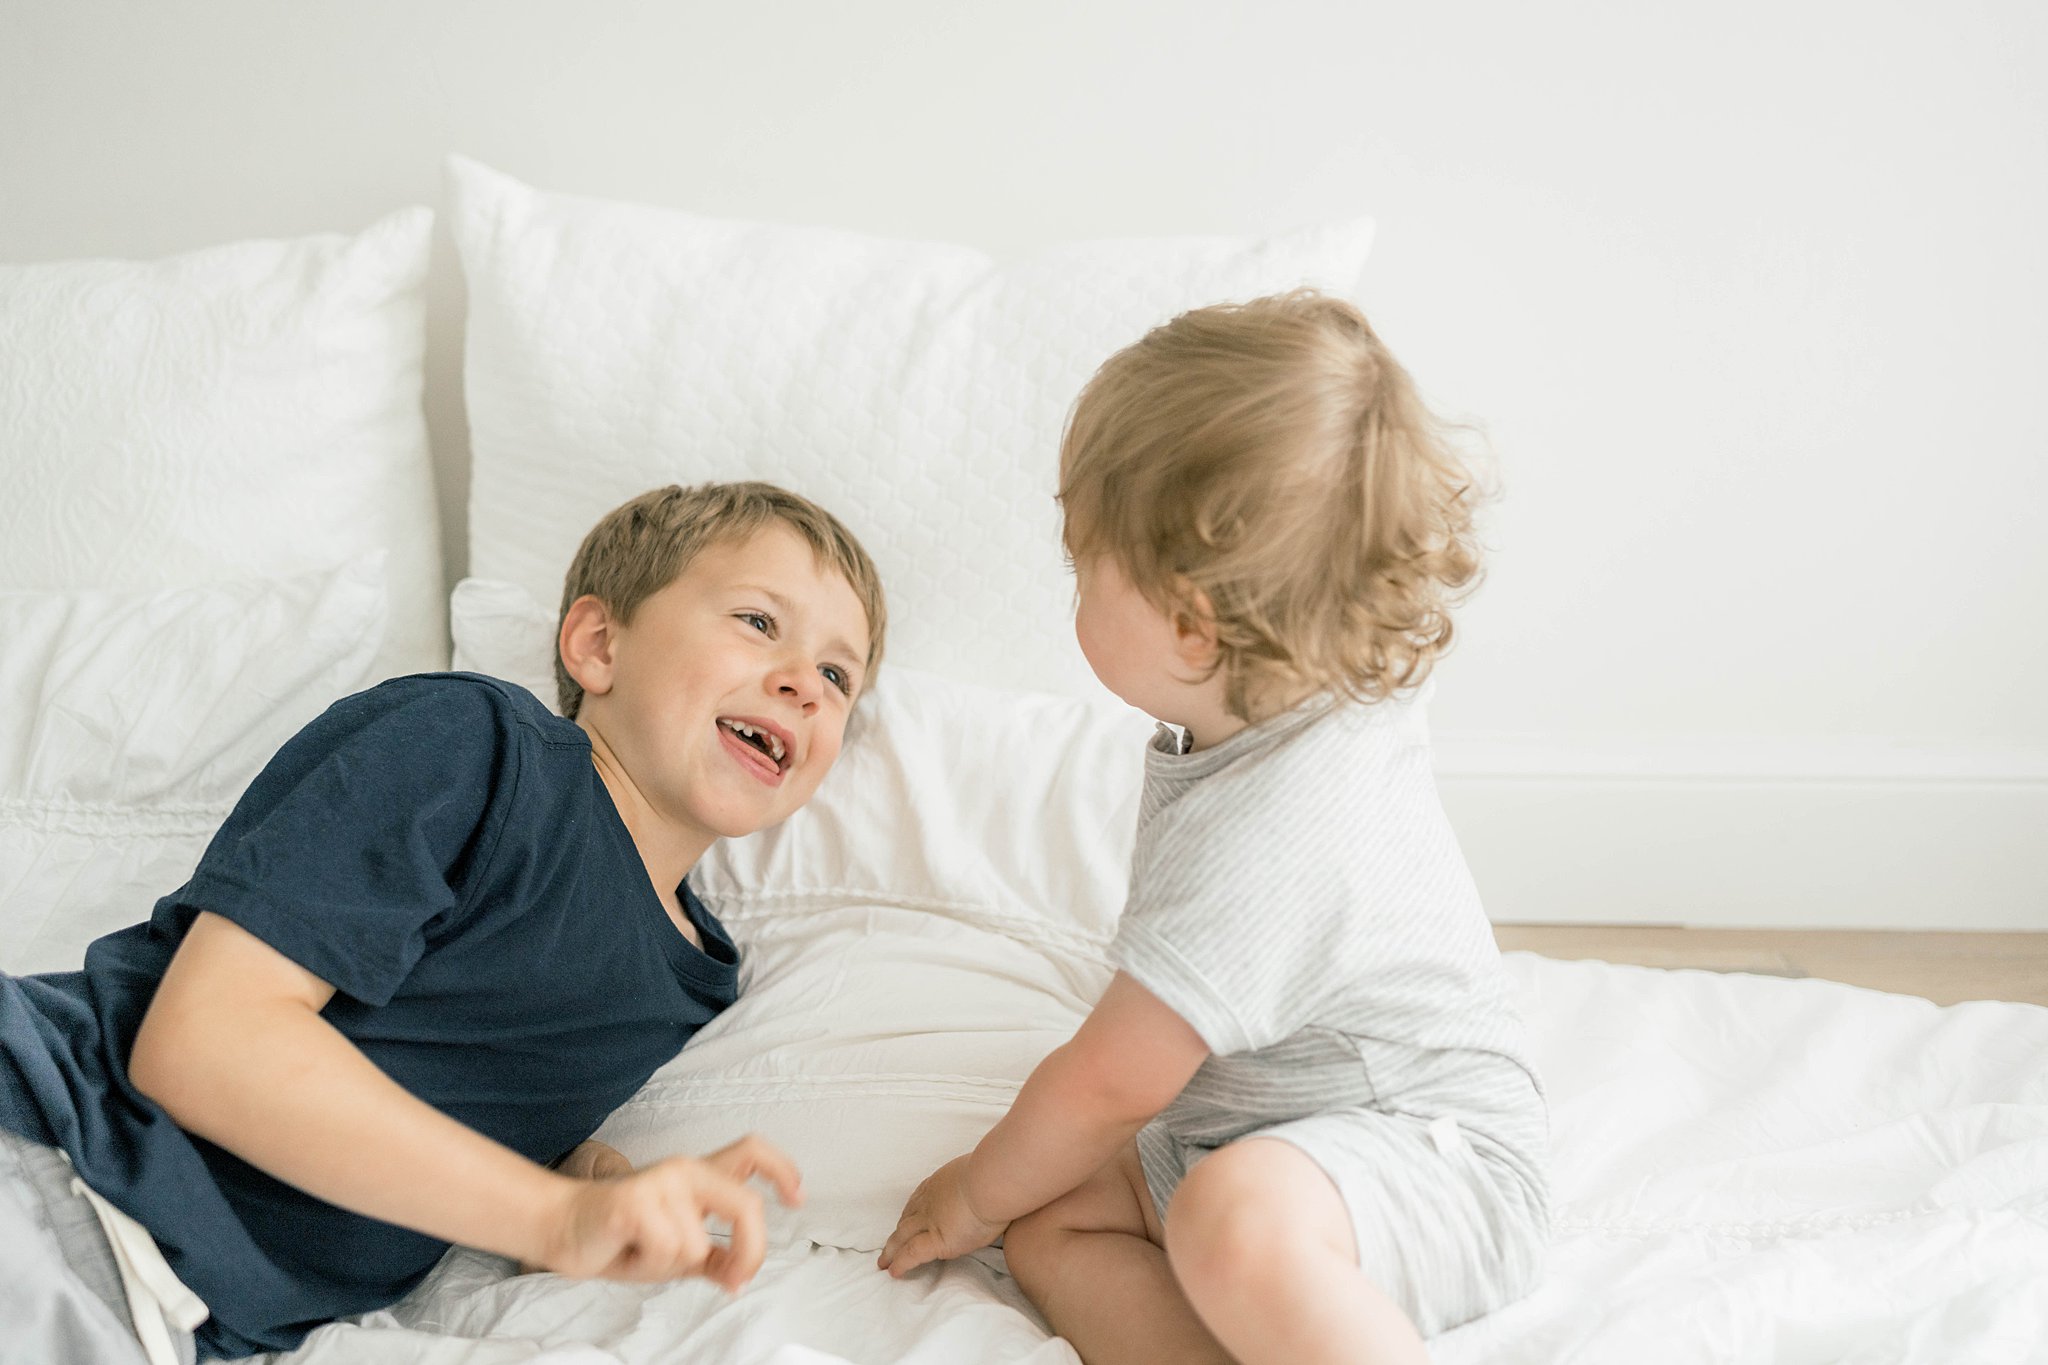 Two young brothers laugh and play while sitting on a bed okc summer activities